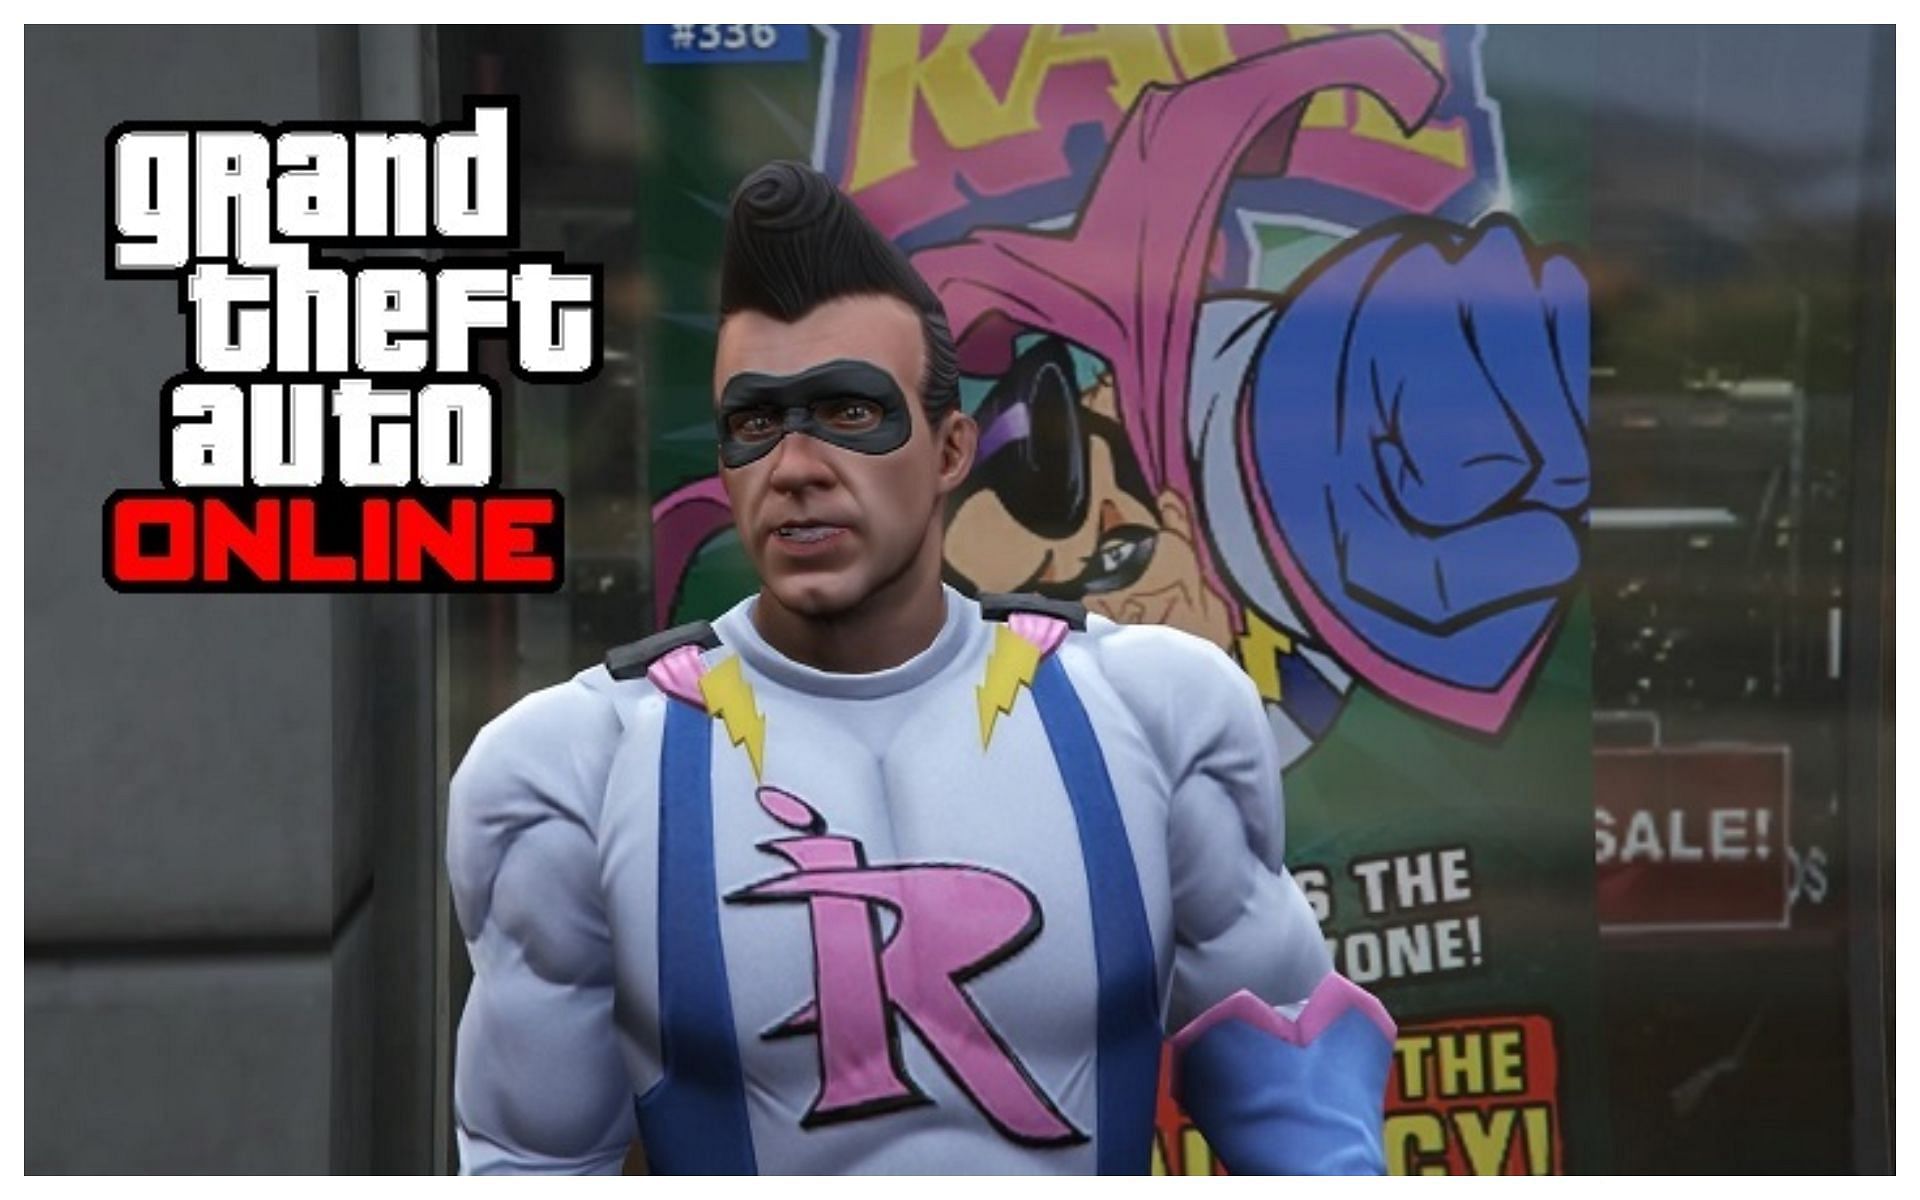 GTA Online gamers receive the Impotent Rage outfit (Image via Sportskeeda)